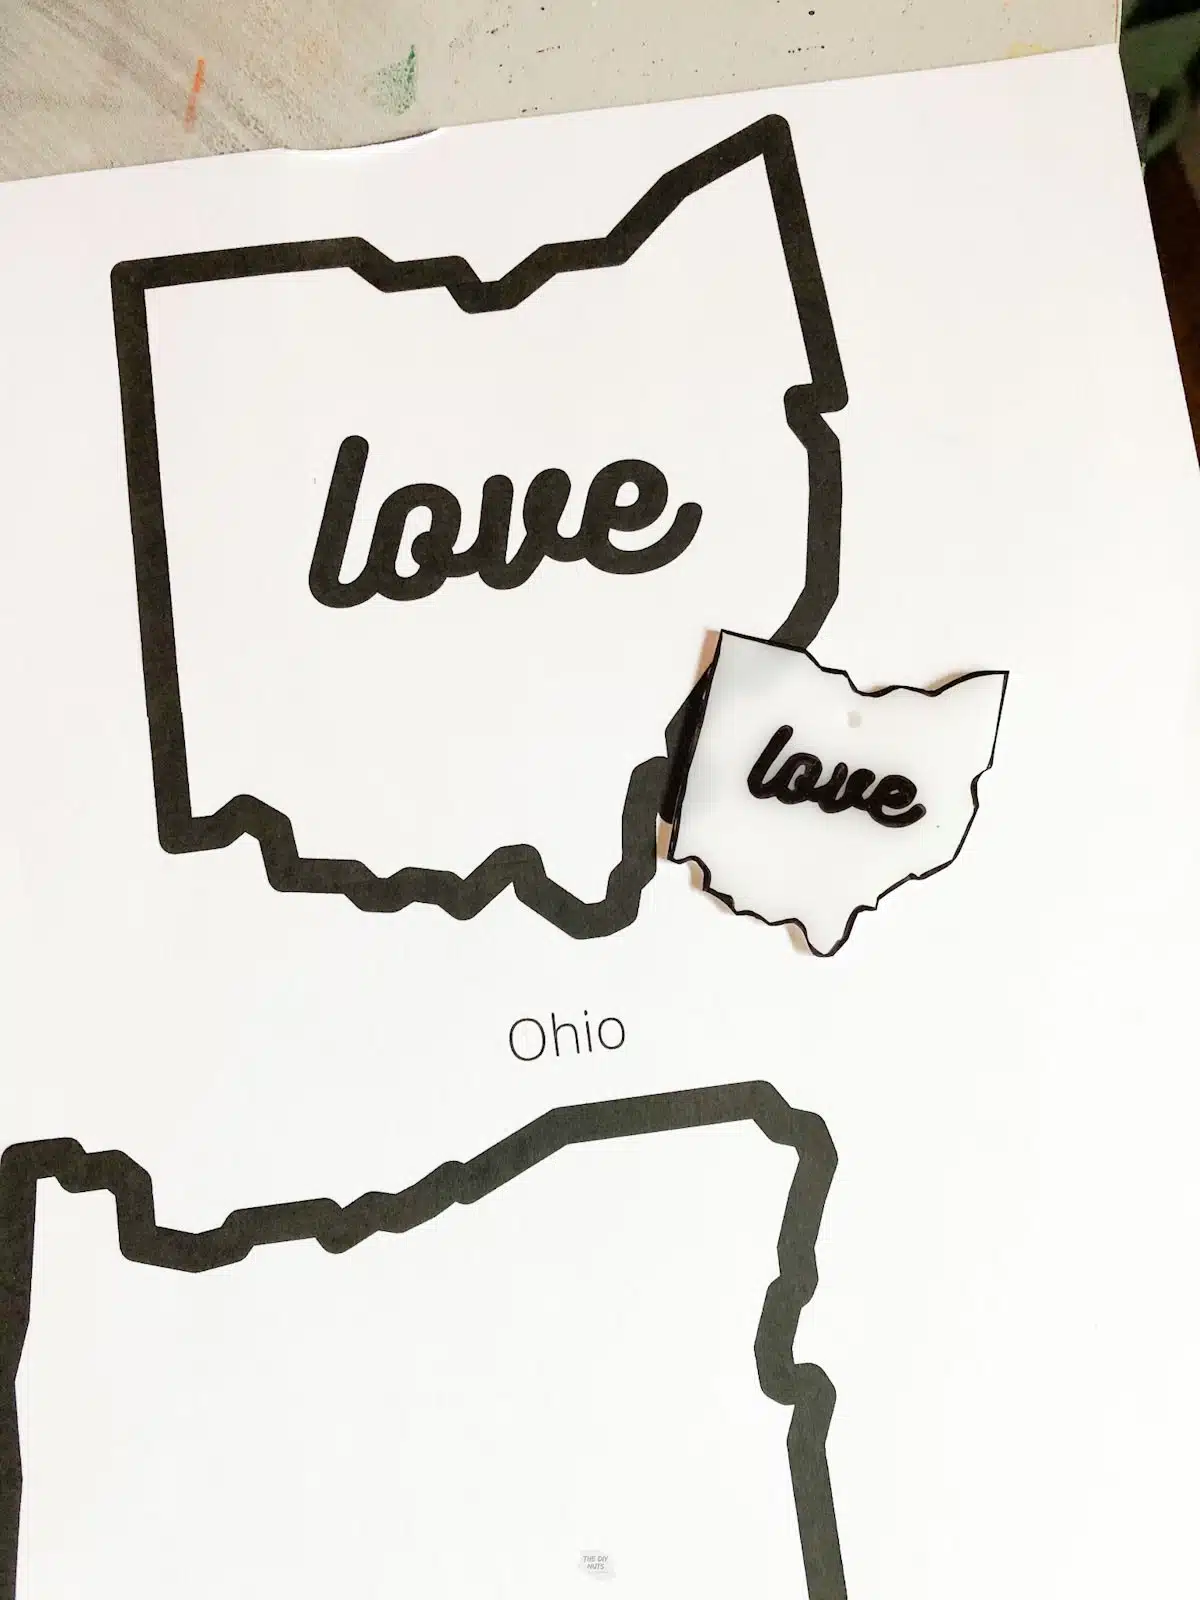 state craft on plastic next to template of Ohio.